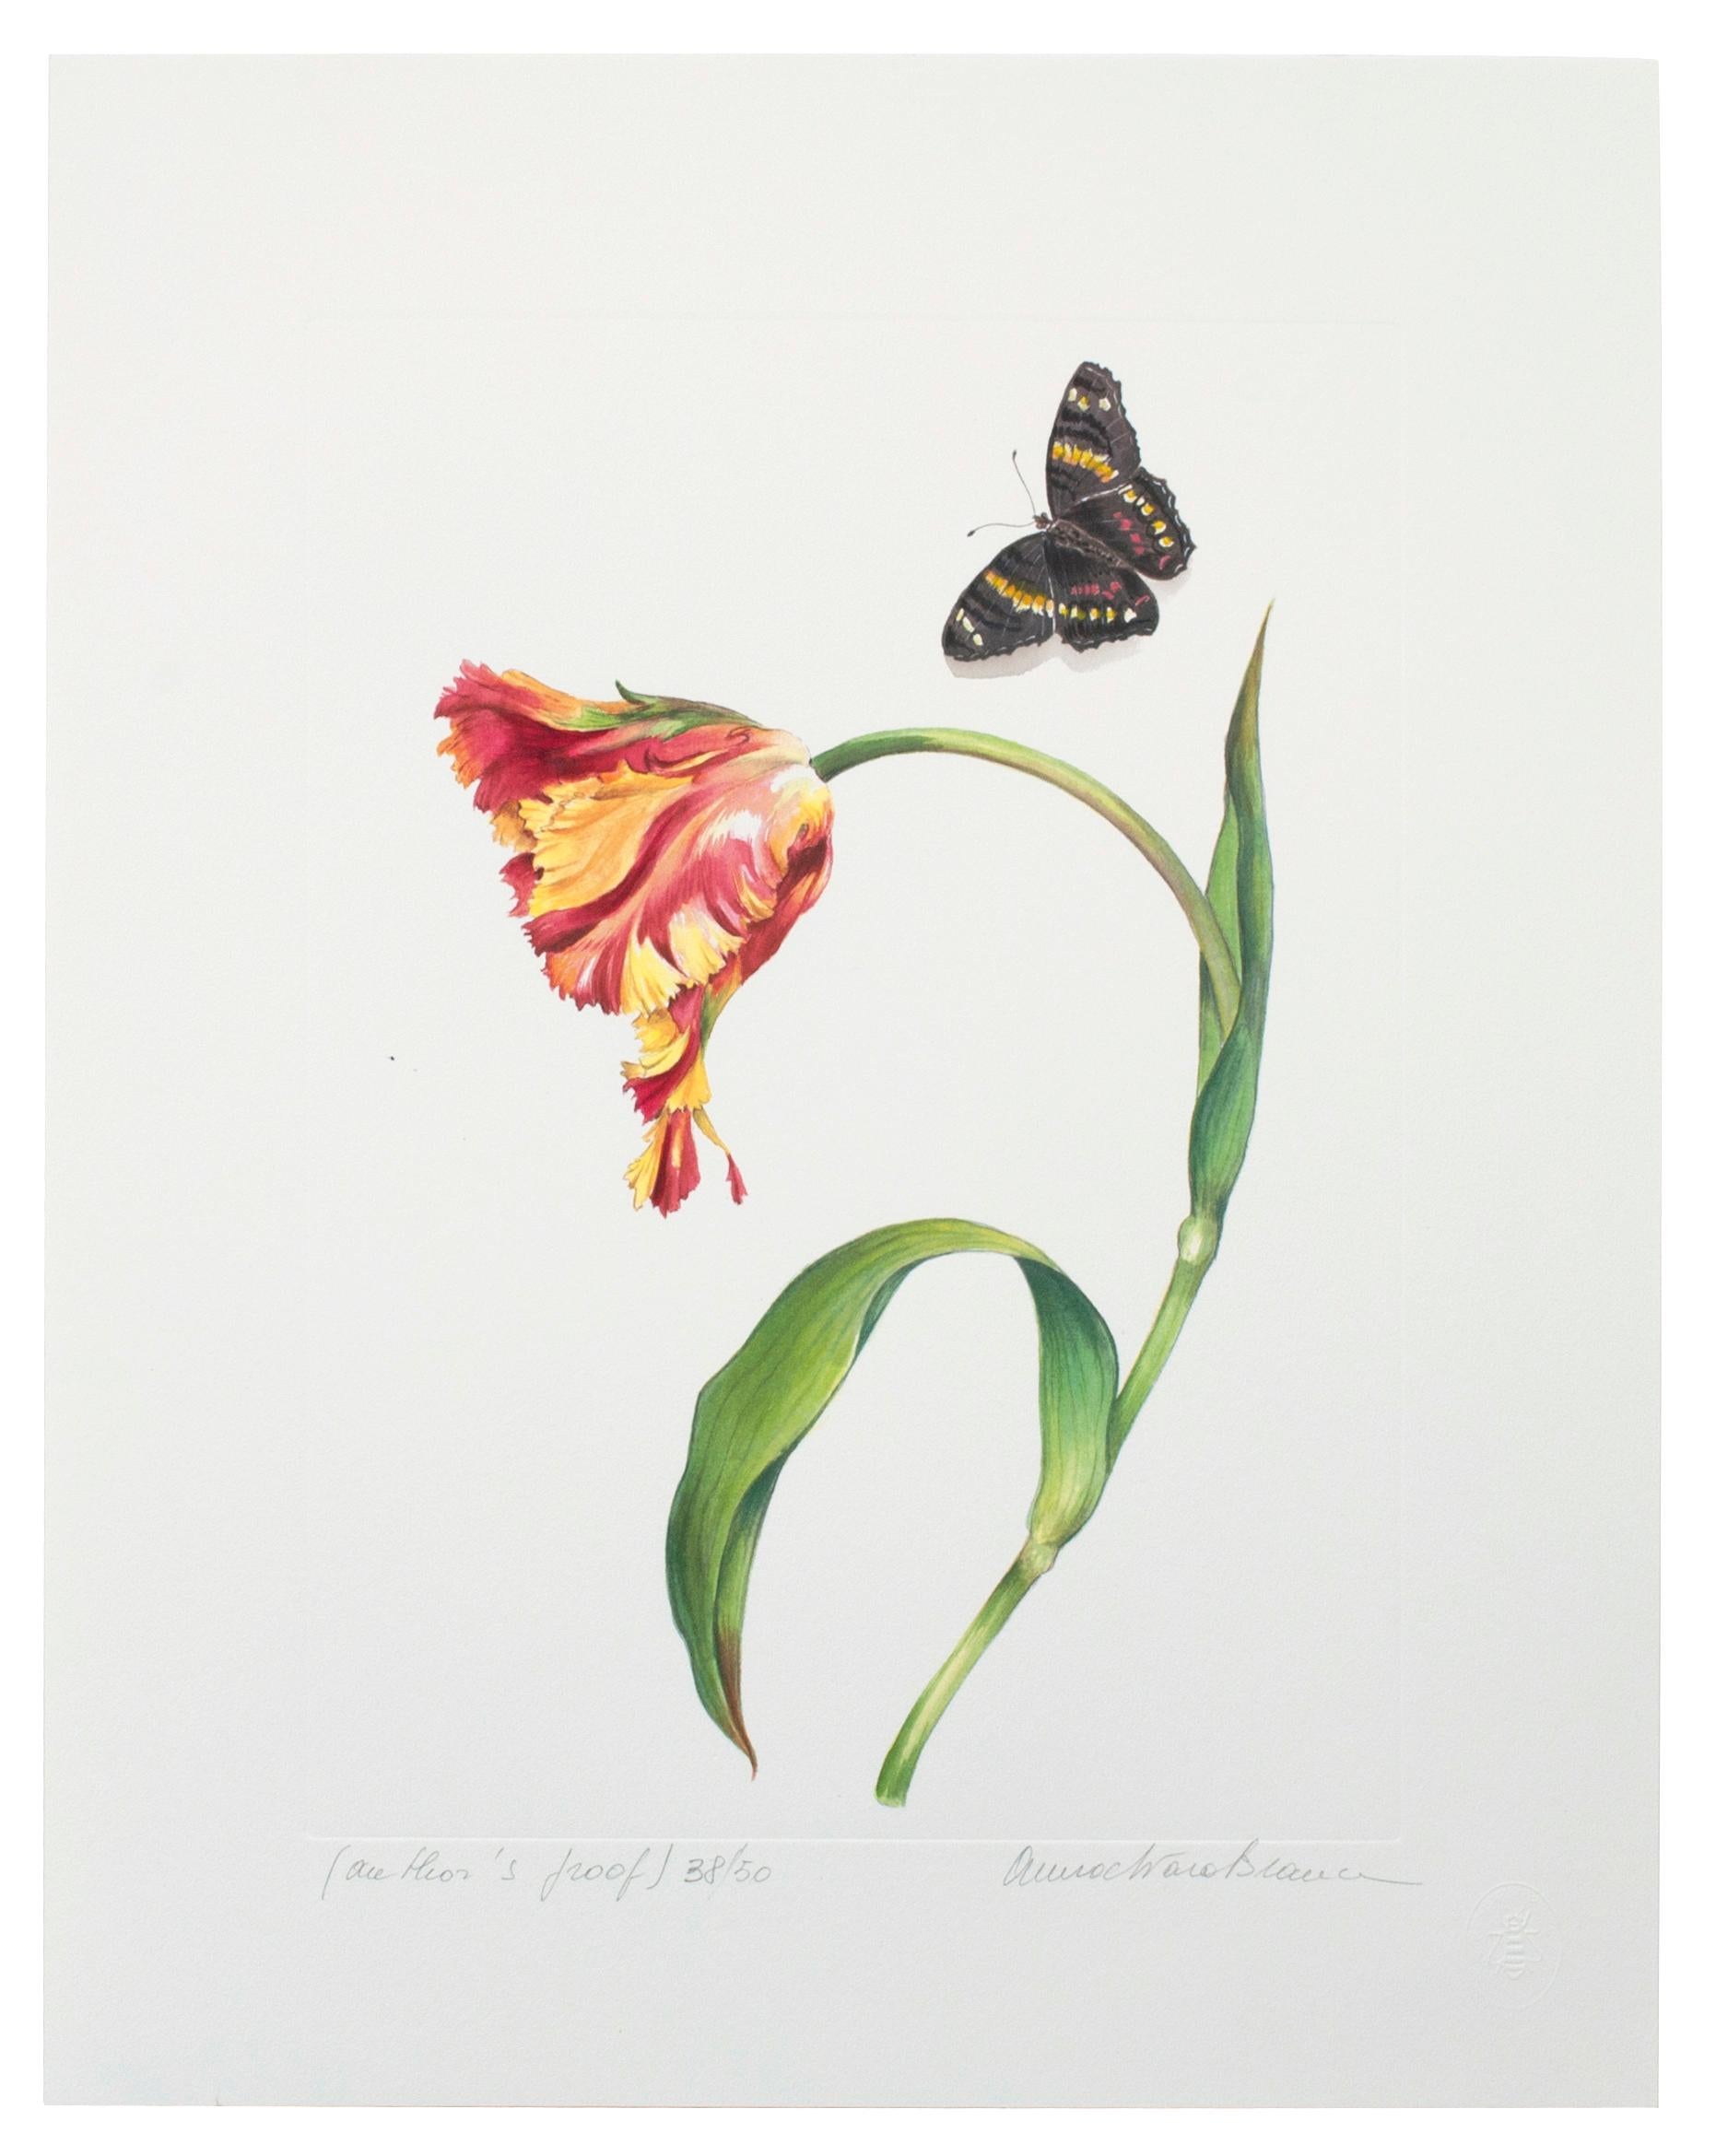 Eight un-framed watercolor tulip prints by botanical artist Anna Chiara Branca, each signed and numbered. Please note that these are not originals they are prints.
  